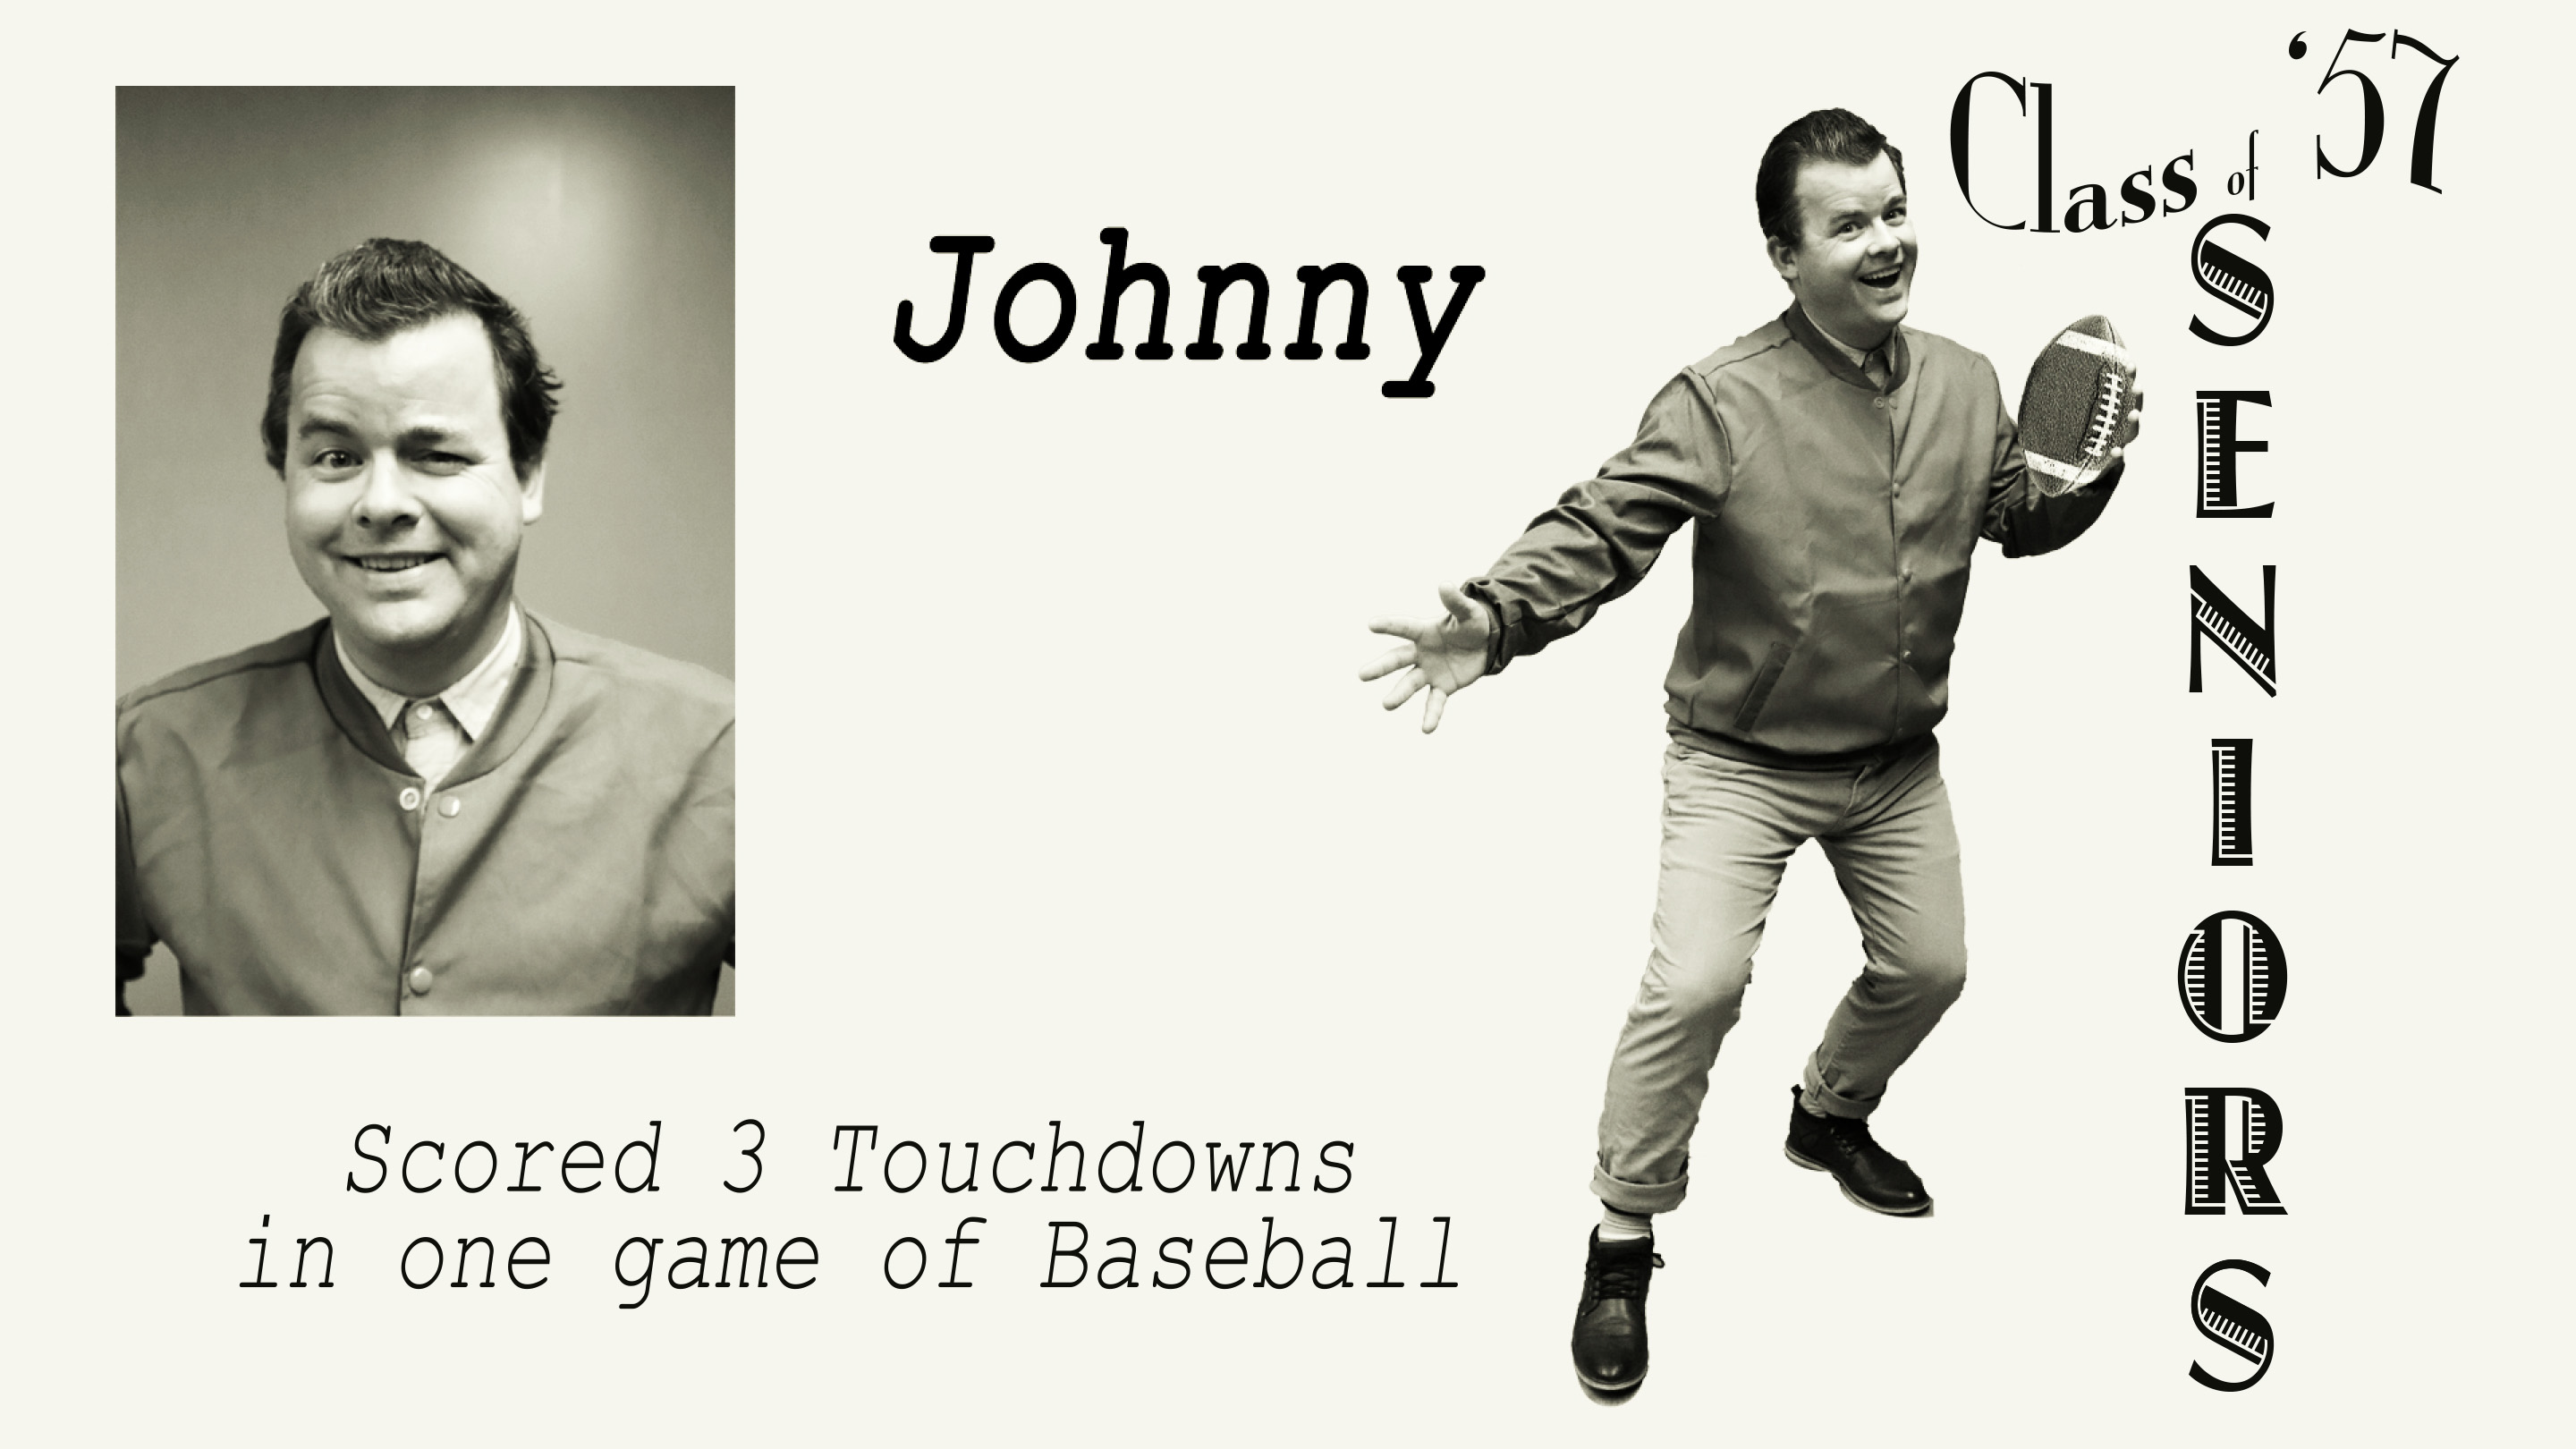 All about Johnny